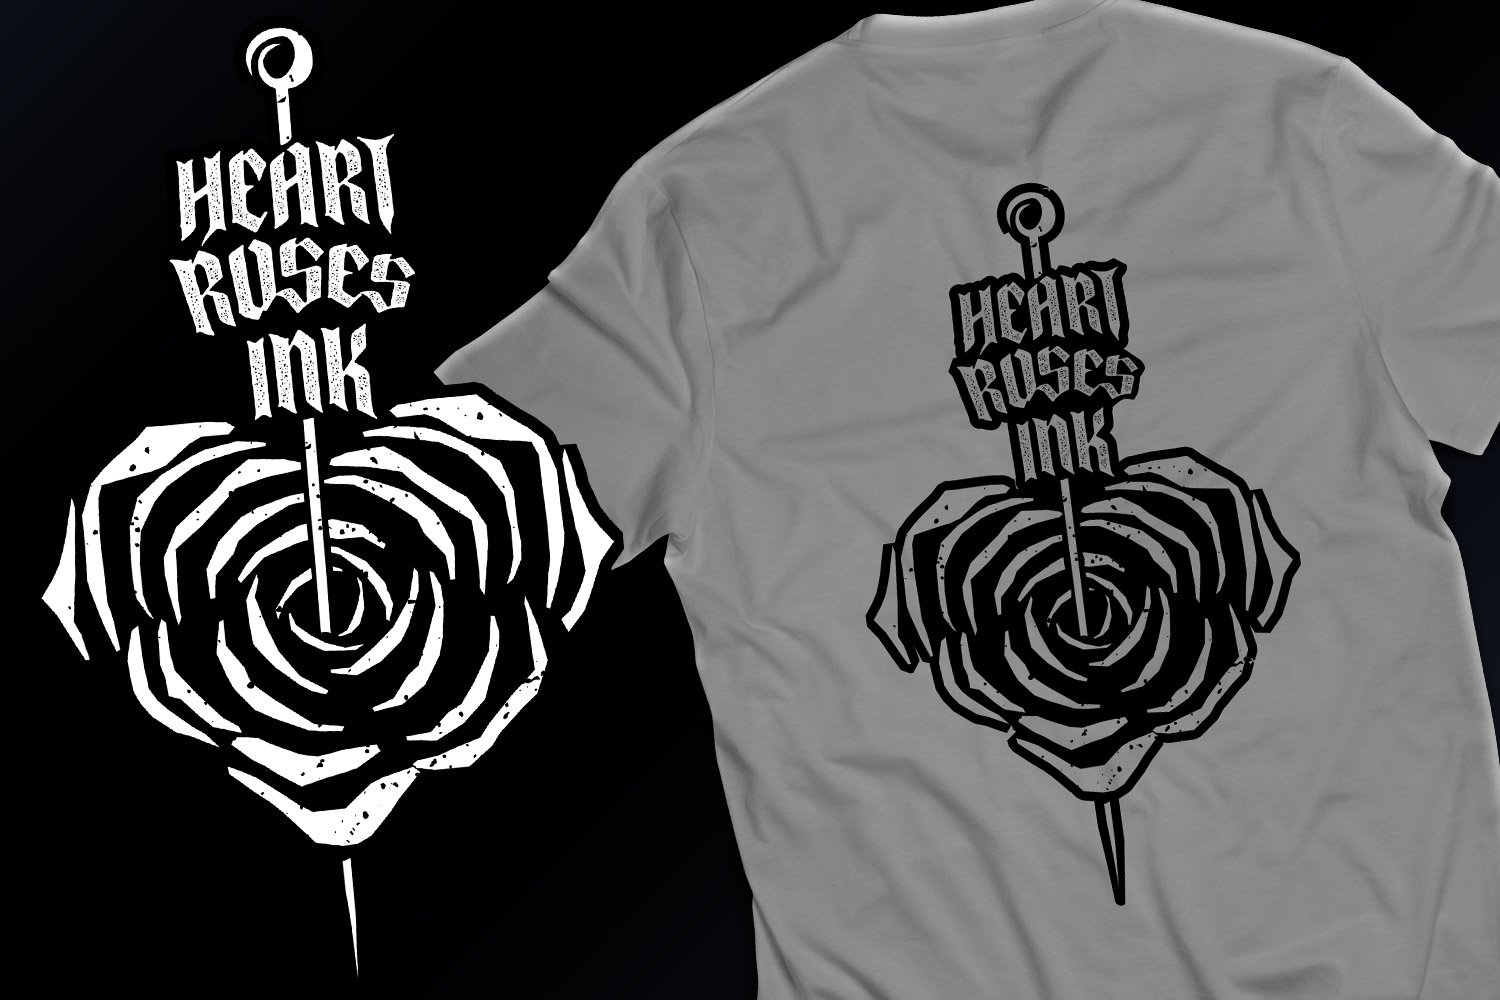 tshirt cattedrale white heart roses ink 610